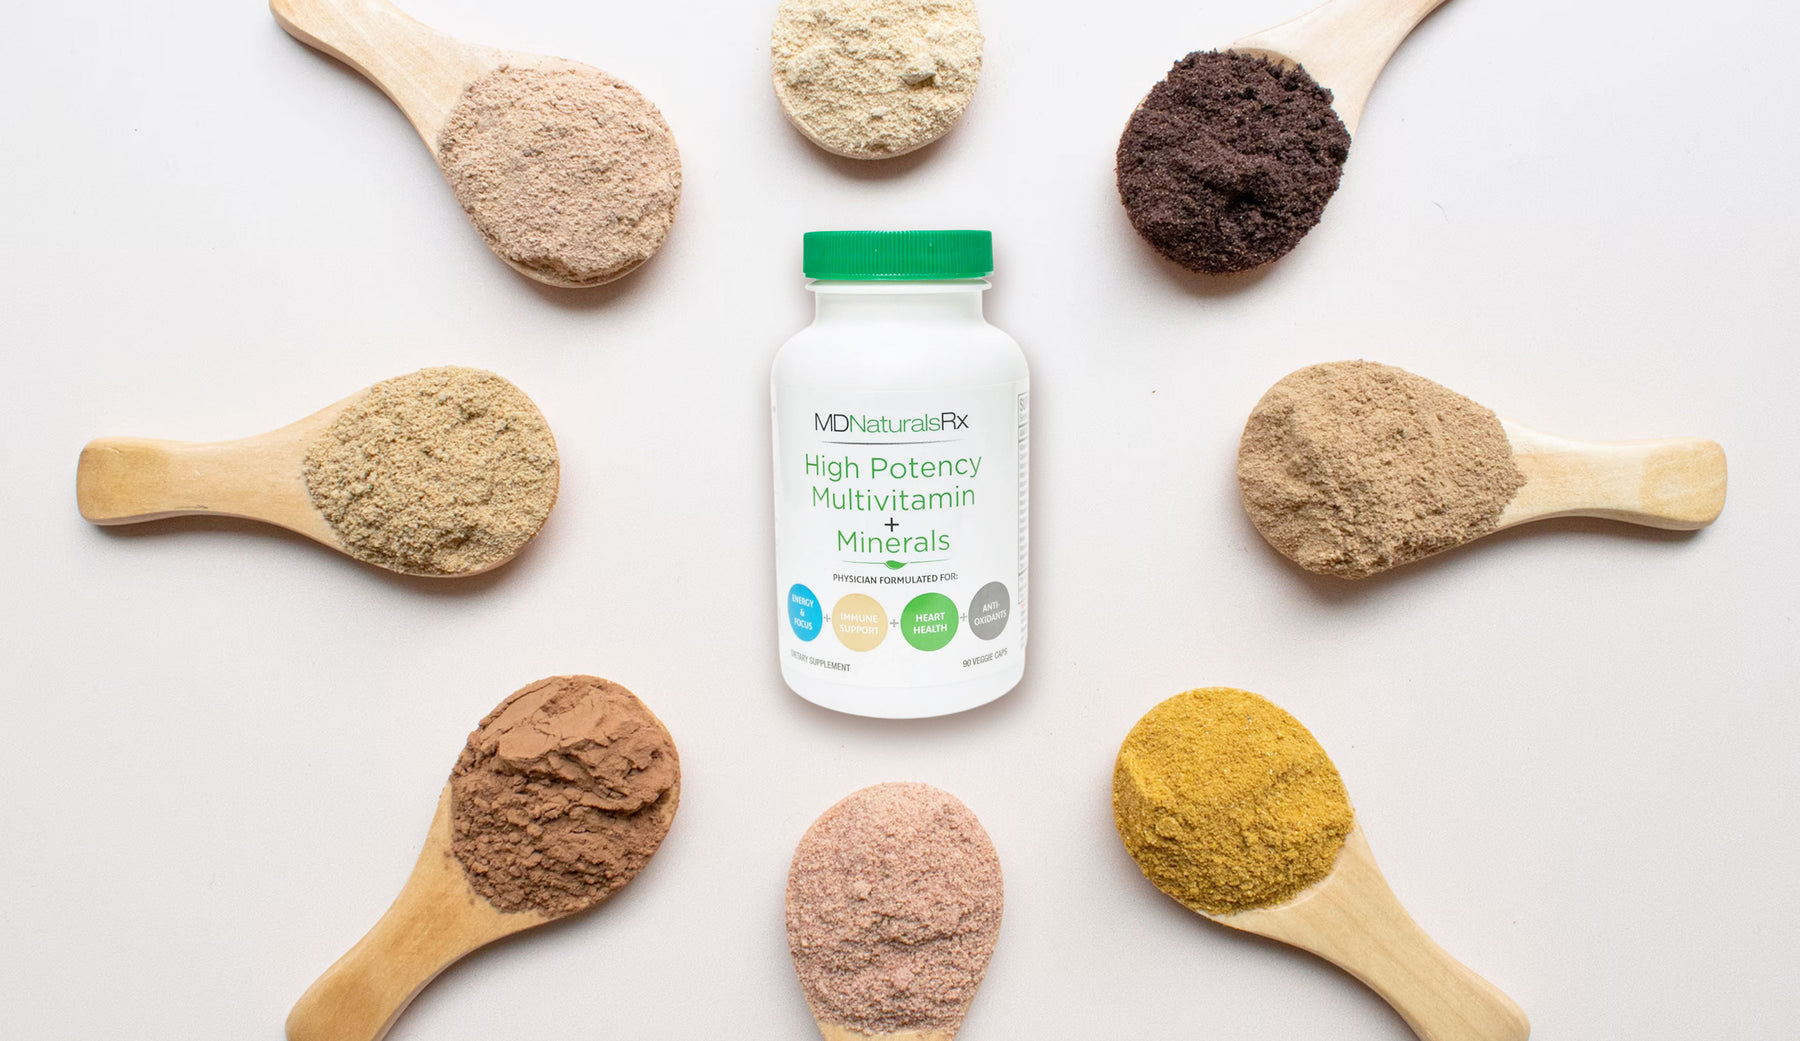 MDNaturalsRx | Our products use the best ingredients and vitamins to help your body stay healthy